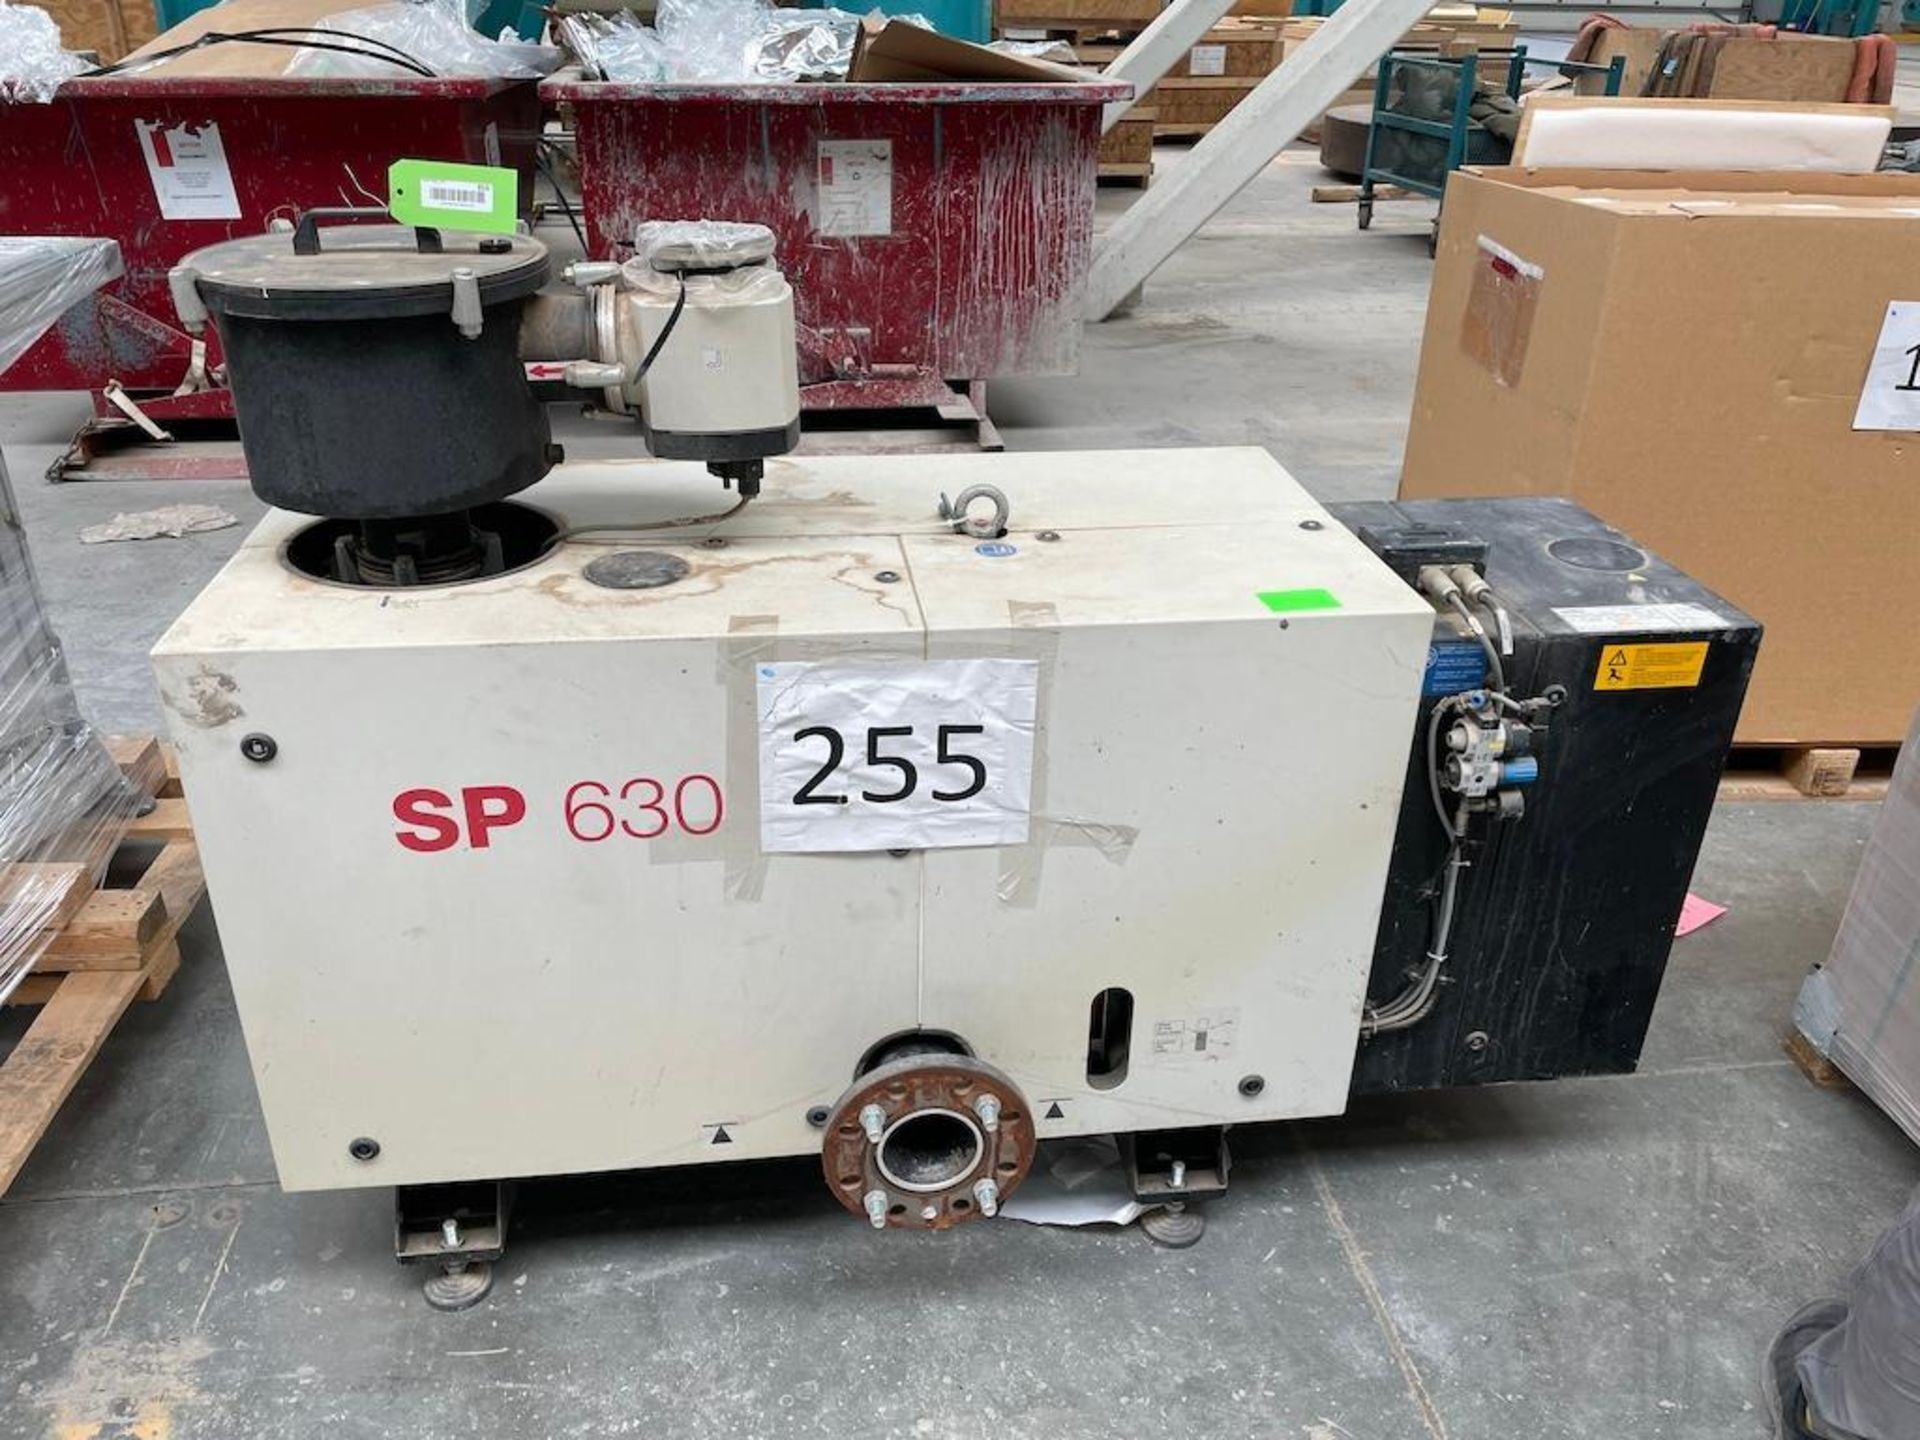 LOT (3) PCS INCLUDING: 2012 RIPPERT SUCTION FAN, TYPE HD-80-2800 B5S, FLOW RATE 3150 M3/H, APPROX 15